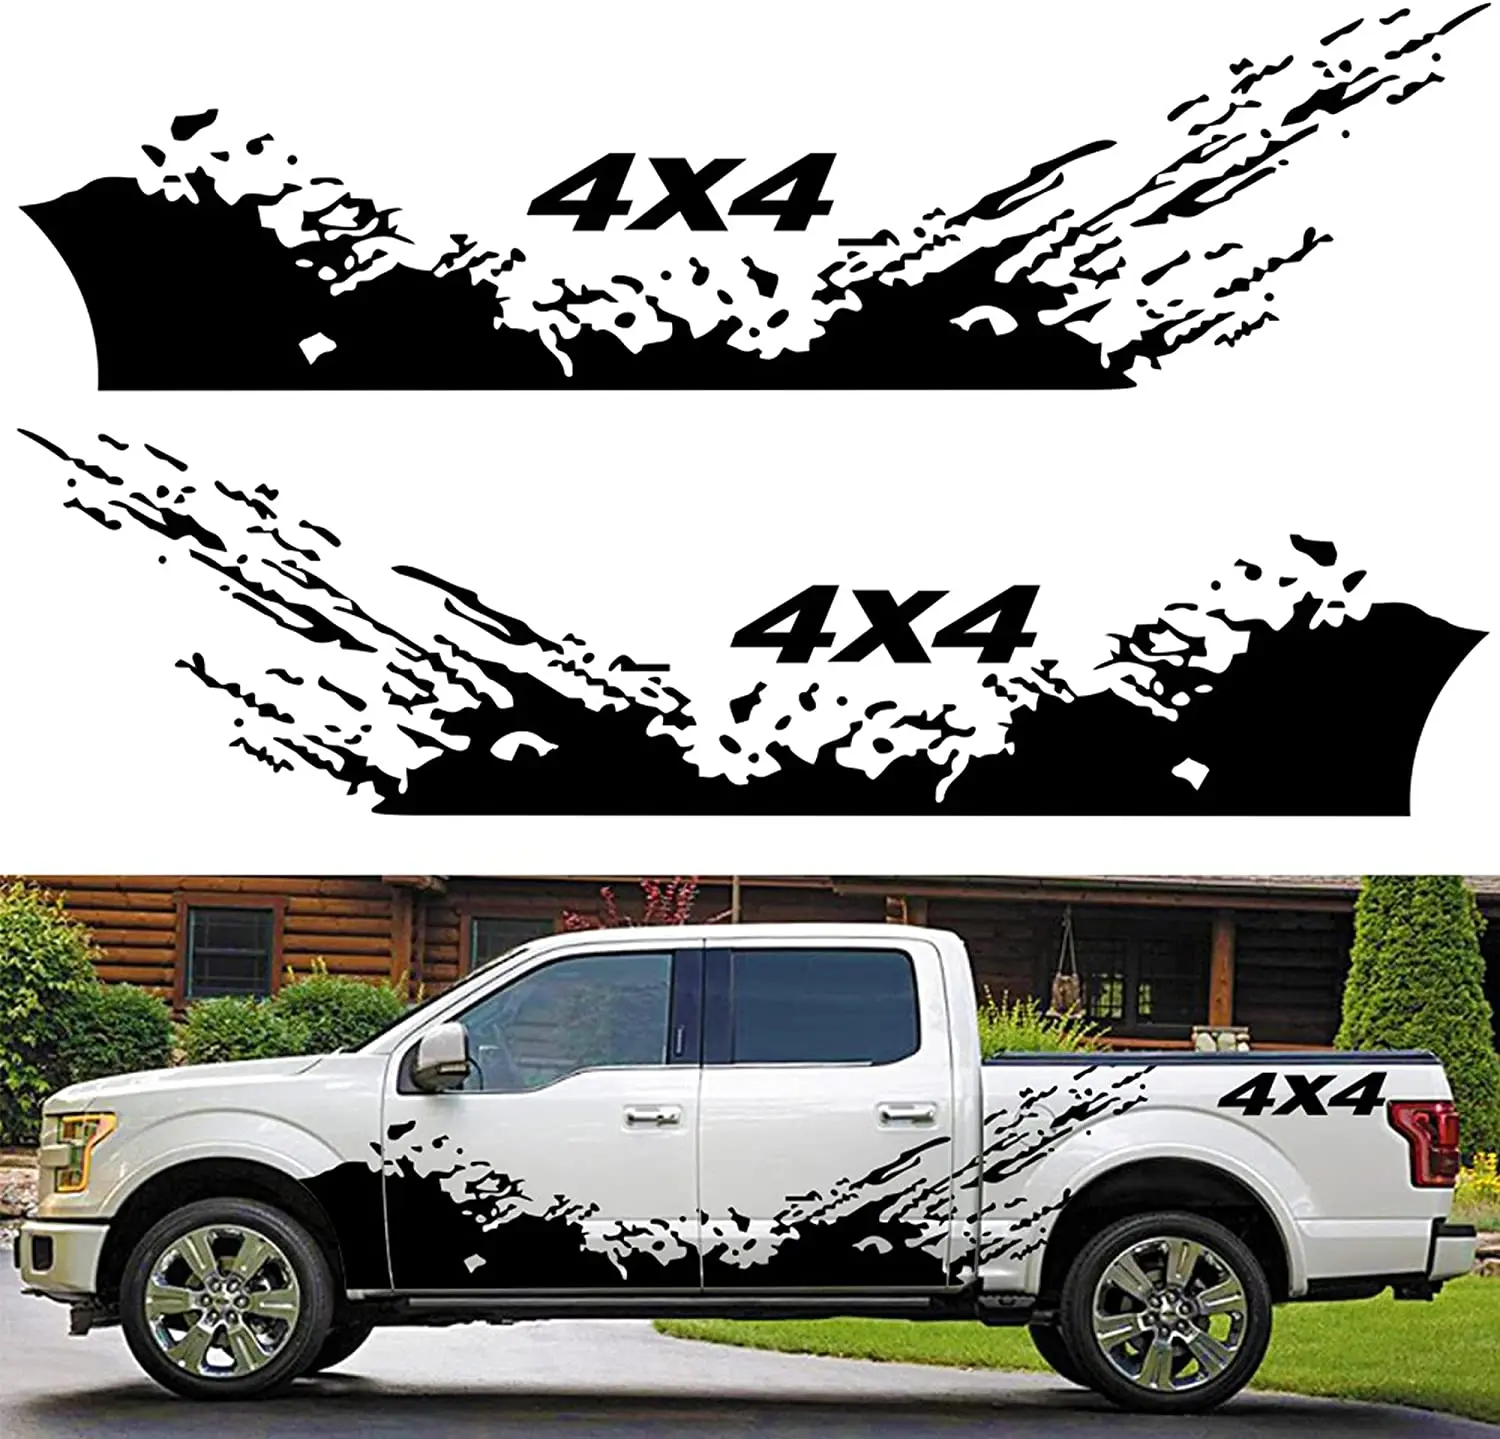 

Fochutech Truck Car Stickers, Large Car Side Decals for Truck Pickup SUV Jeep, Racing Stripes Car Stickers 4x4, Waves Graphics V